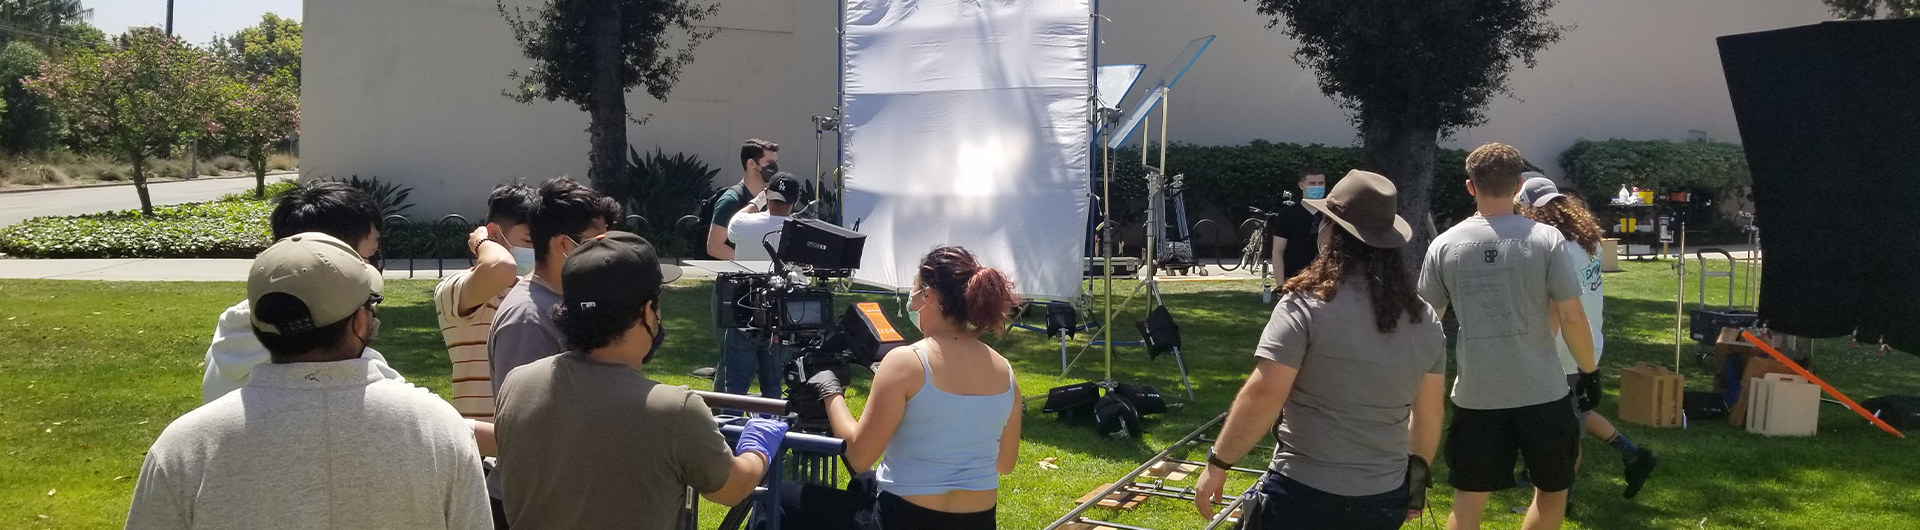 Cinematography students on set on campus